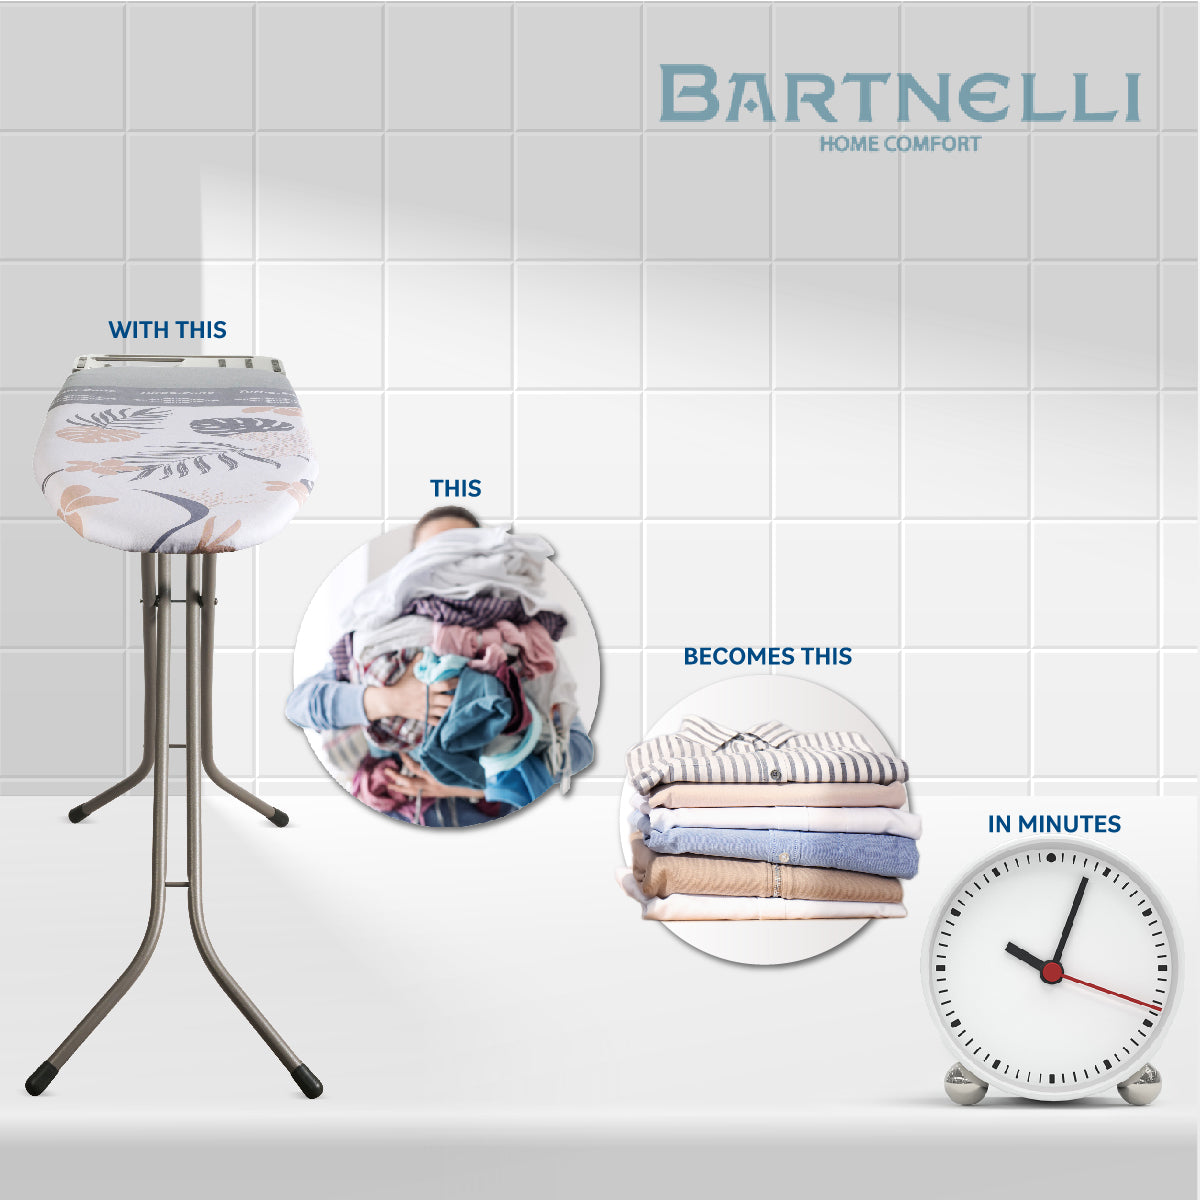 Bartnelli Heavy Duty Ironing Board 48x15 | Designed & Made in Europe with Patent Technology, Turbo & Park Zone, Features: 4 Layer Cover &Pad,Height-Adjustable,4 Premium Steel Legs,Upgraded Iron Rest (TROPICAL)